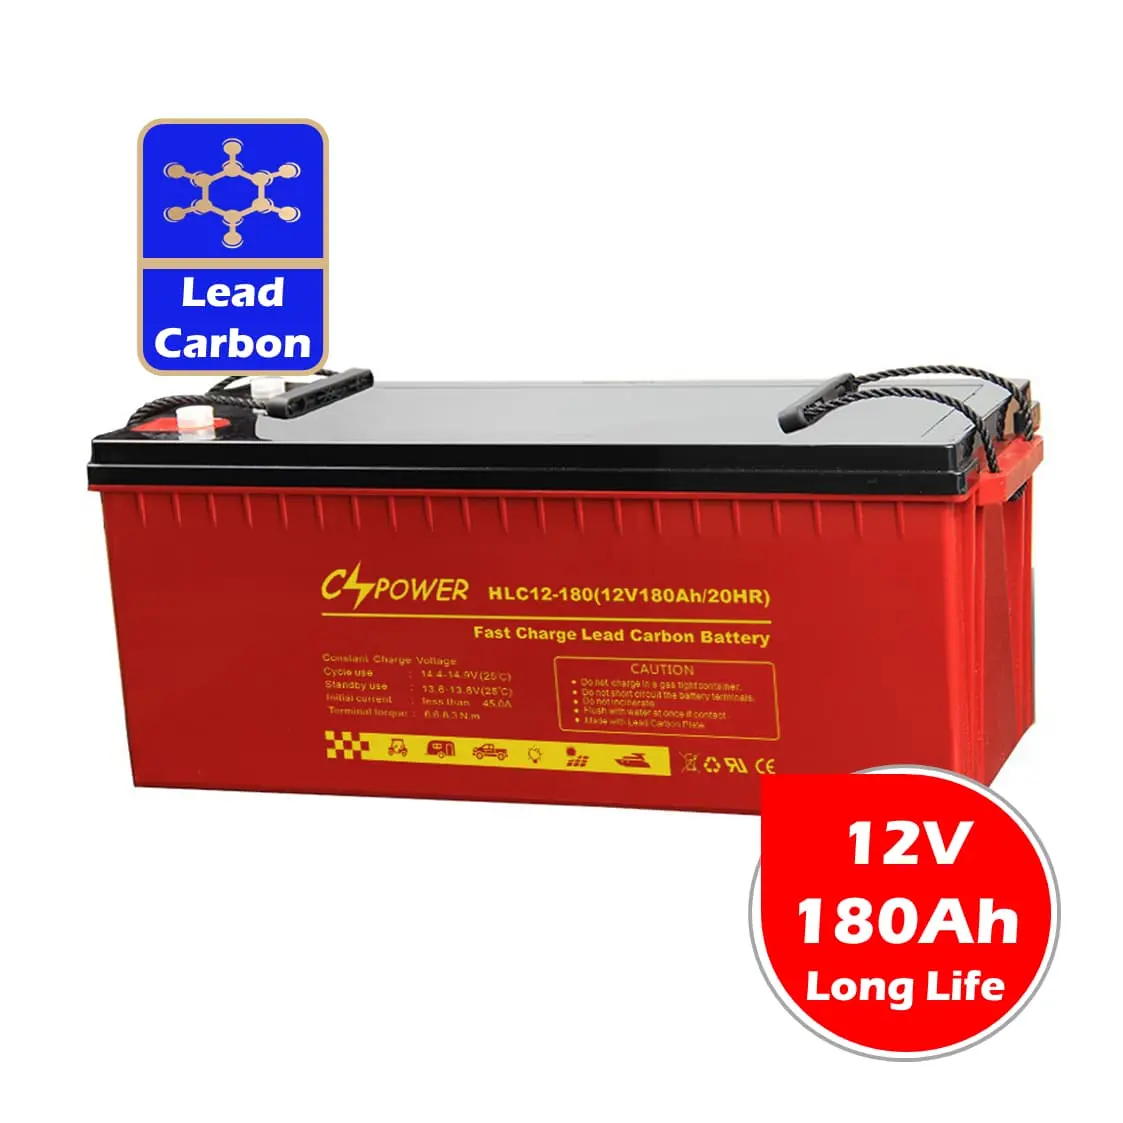 CSPower 12V 180Ah Rechargeable Lead Carbon Battery for Long Life Electric Car China Factory VS: Leoch HLC12-180 DAR